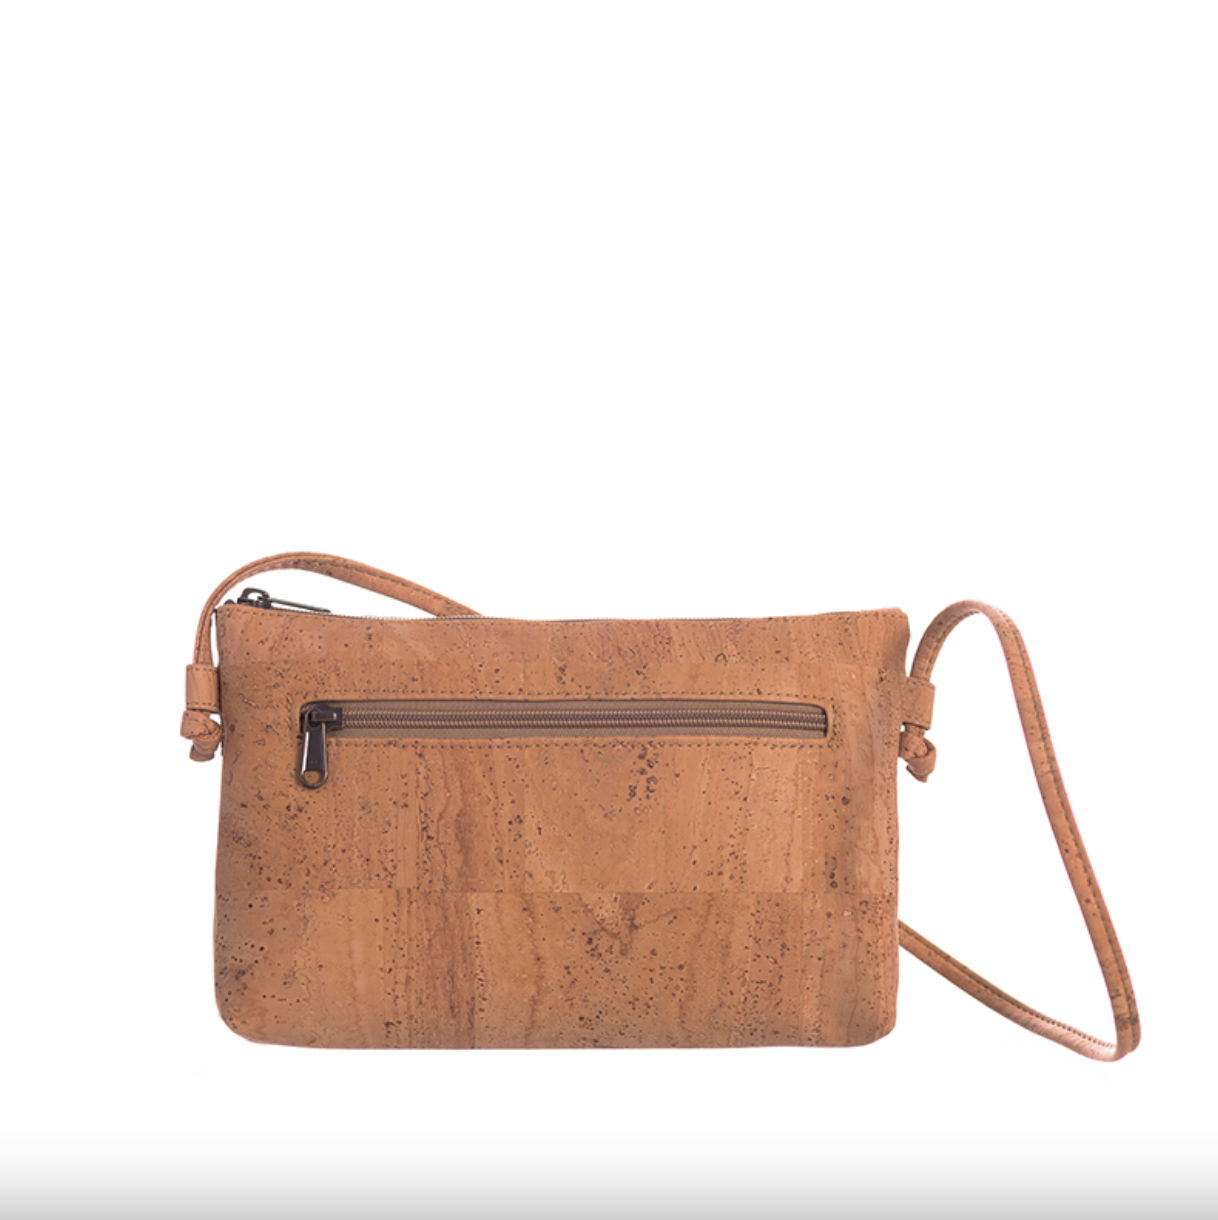 Map Cork Crossbody Bag: Stylish and Sustainable Travel Party Bag with a Map Design